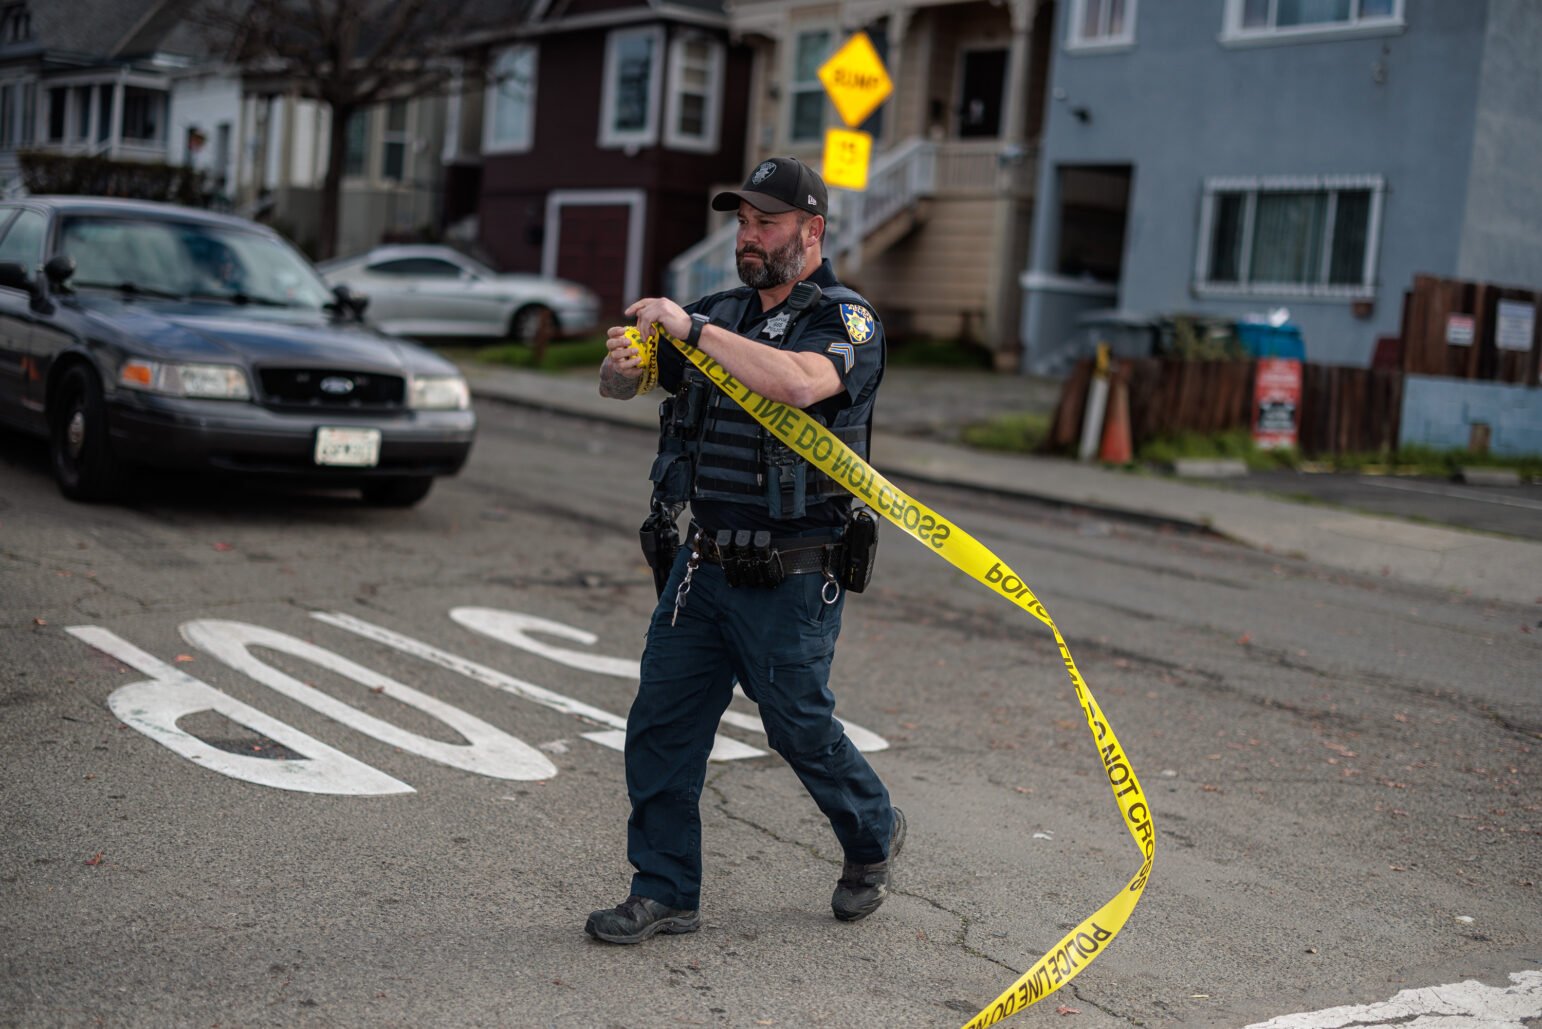 A Vallejo police corporal winds up crime scene tape during daytime.